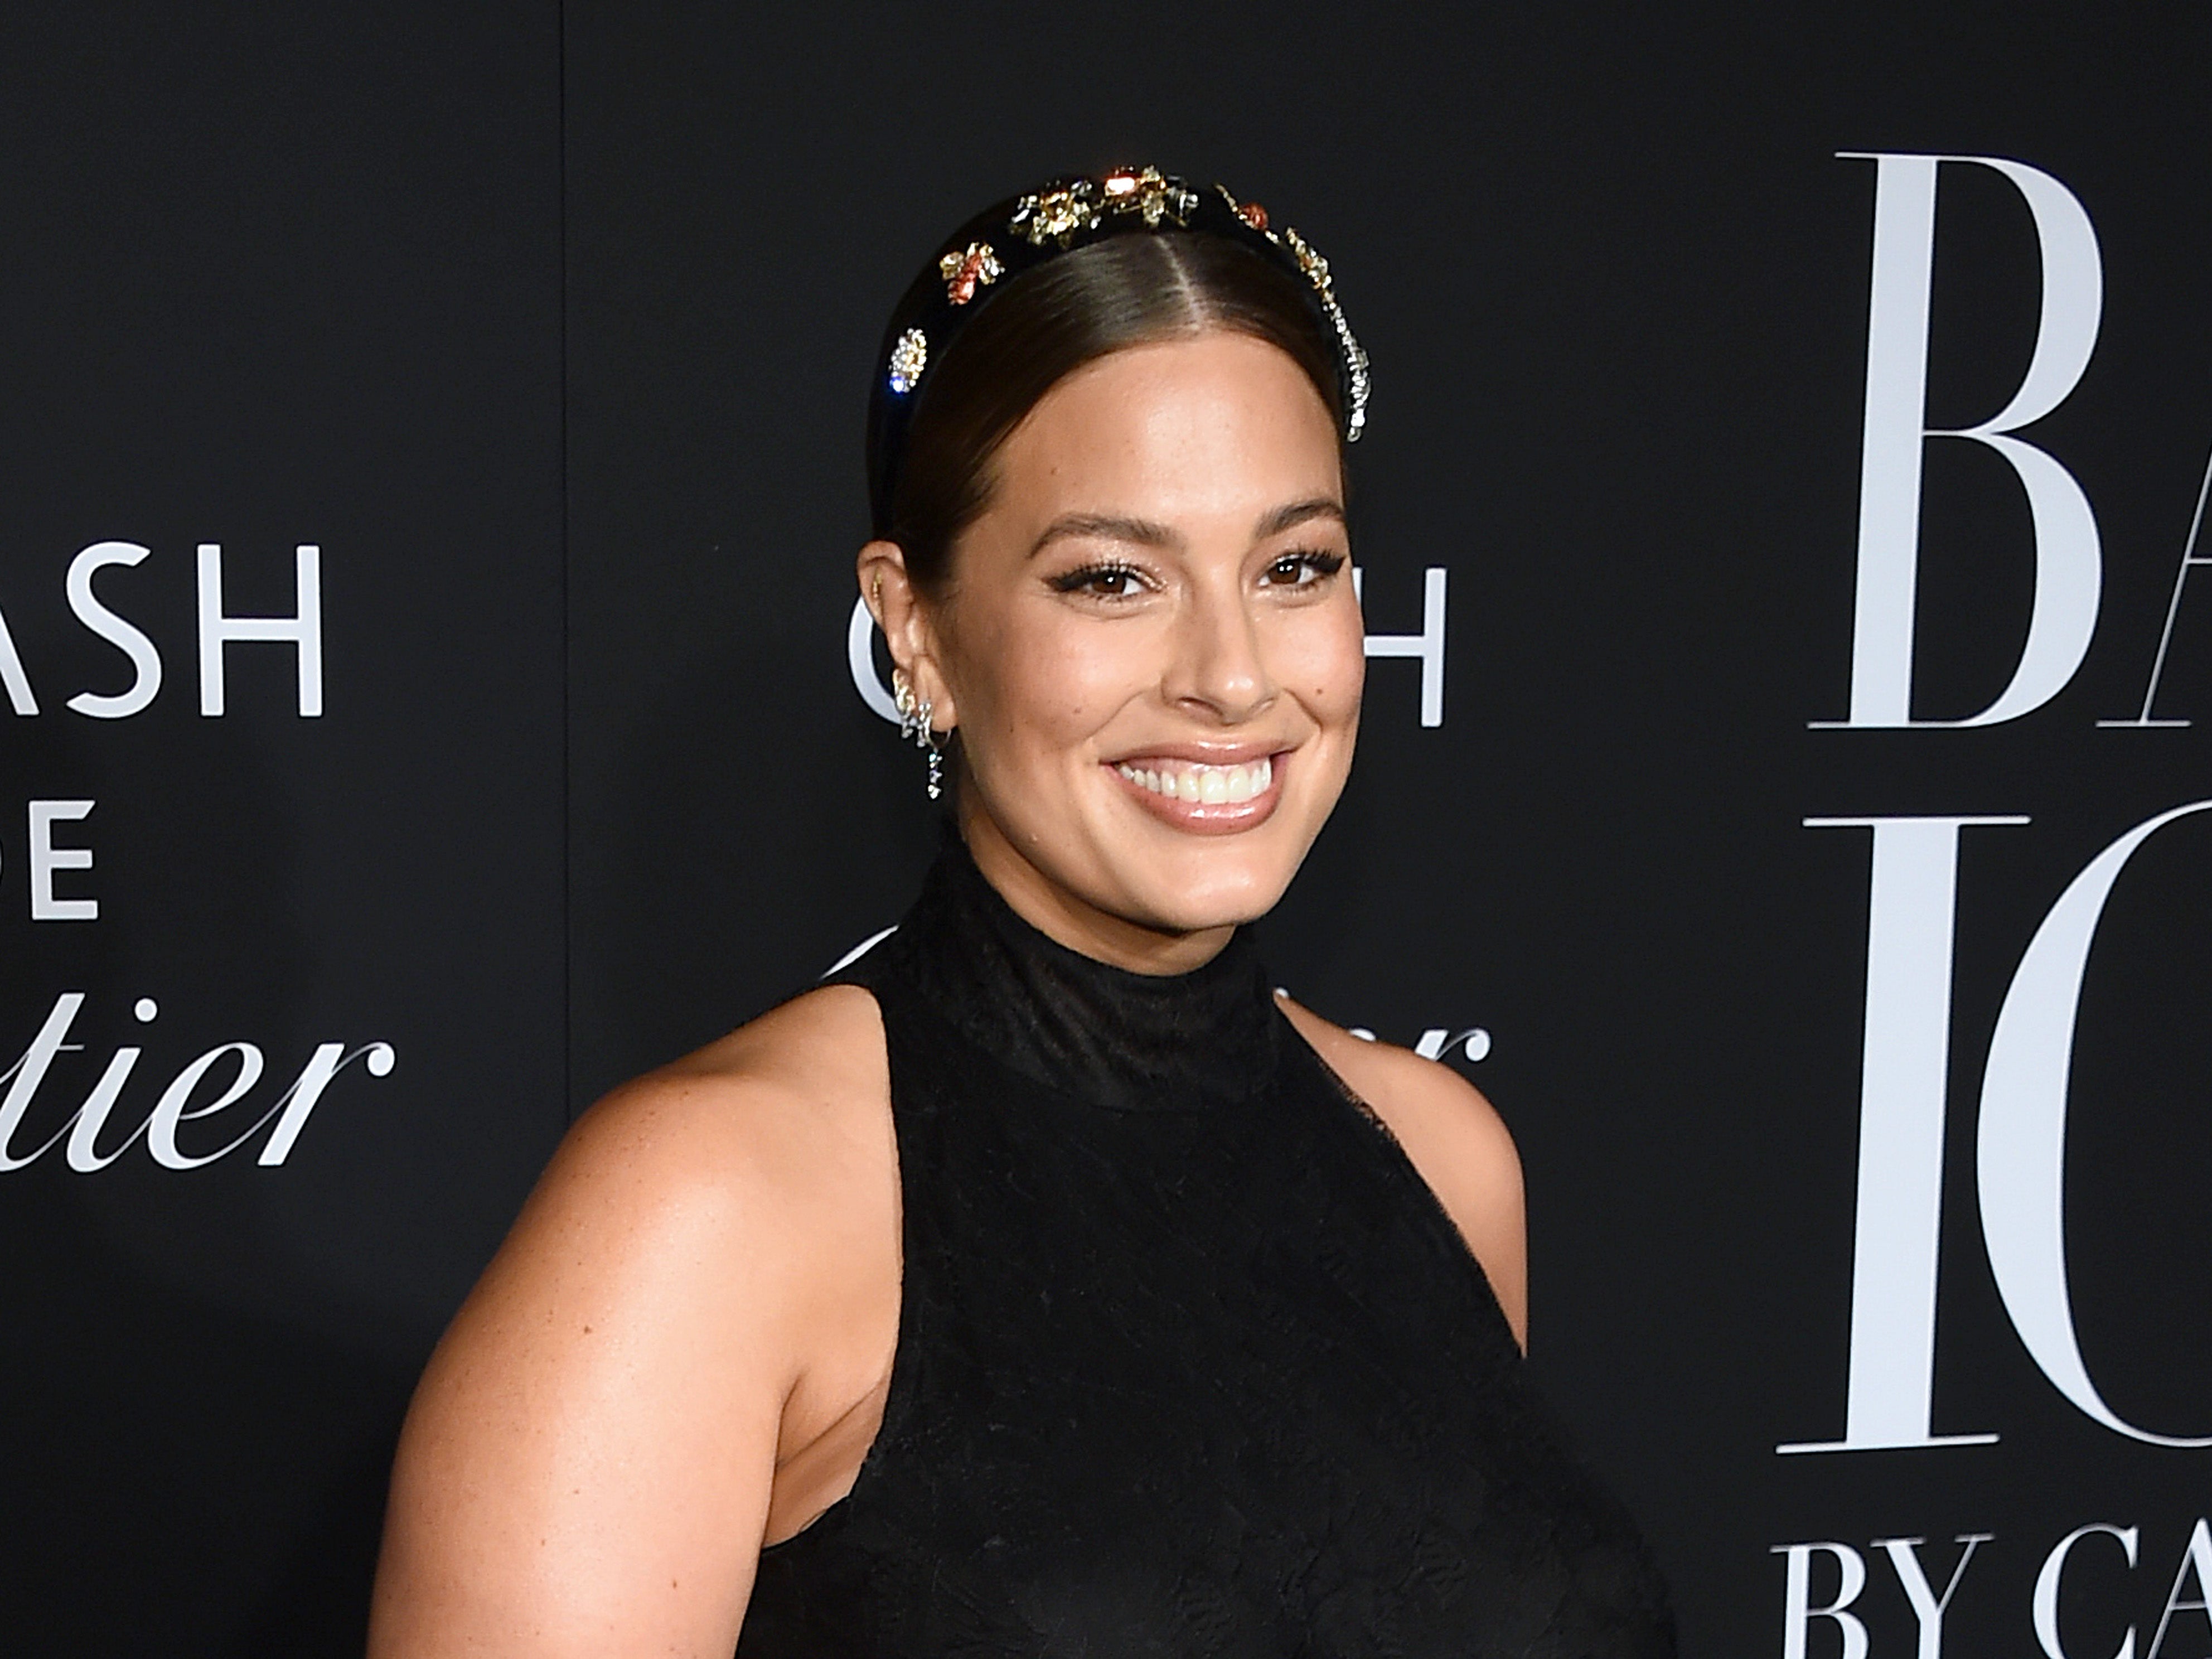 Ashley Graham welcomed twin sons earlier this year